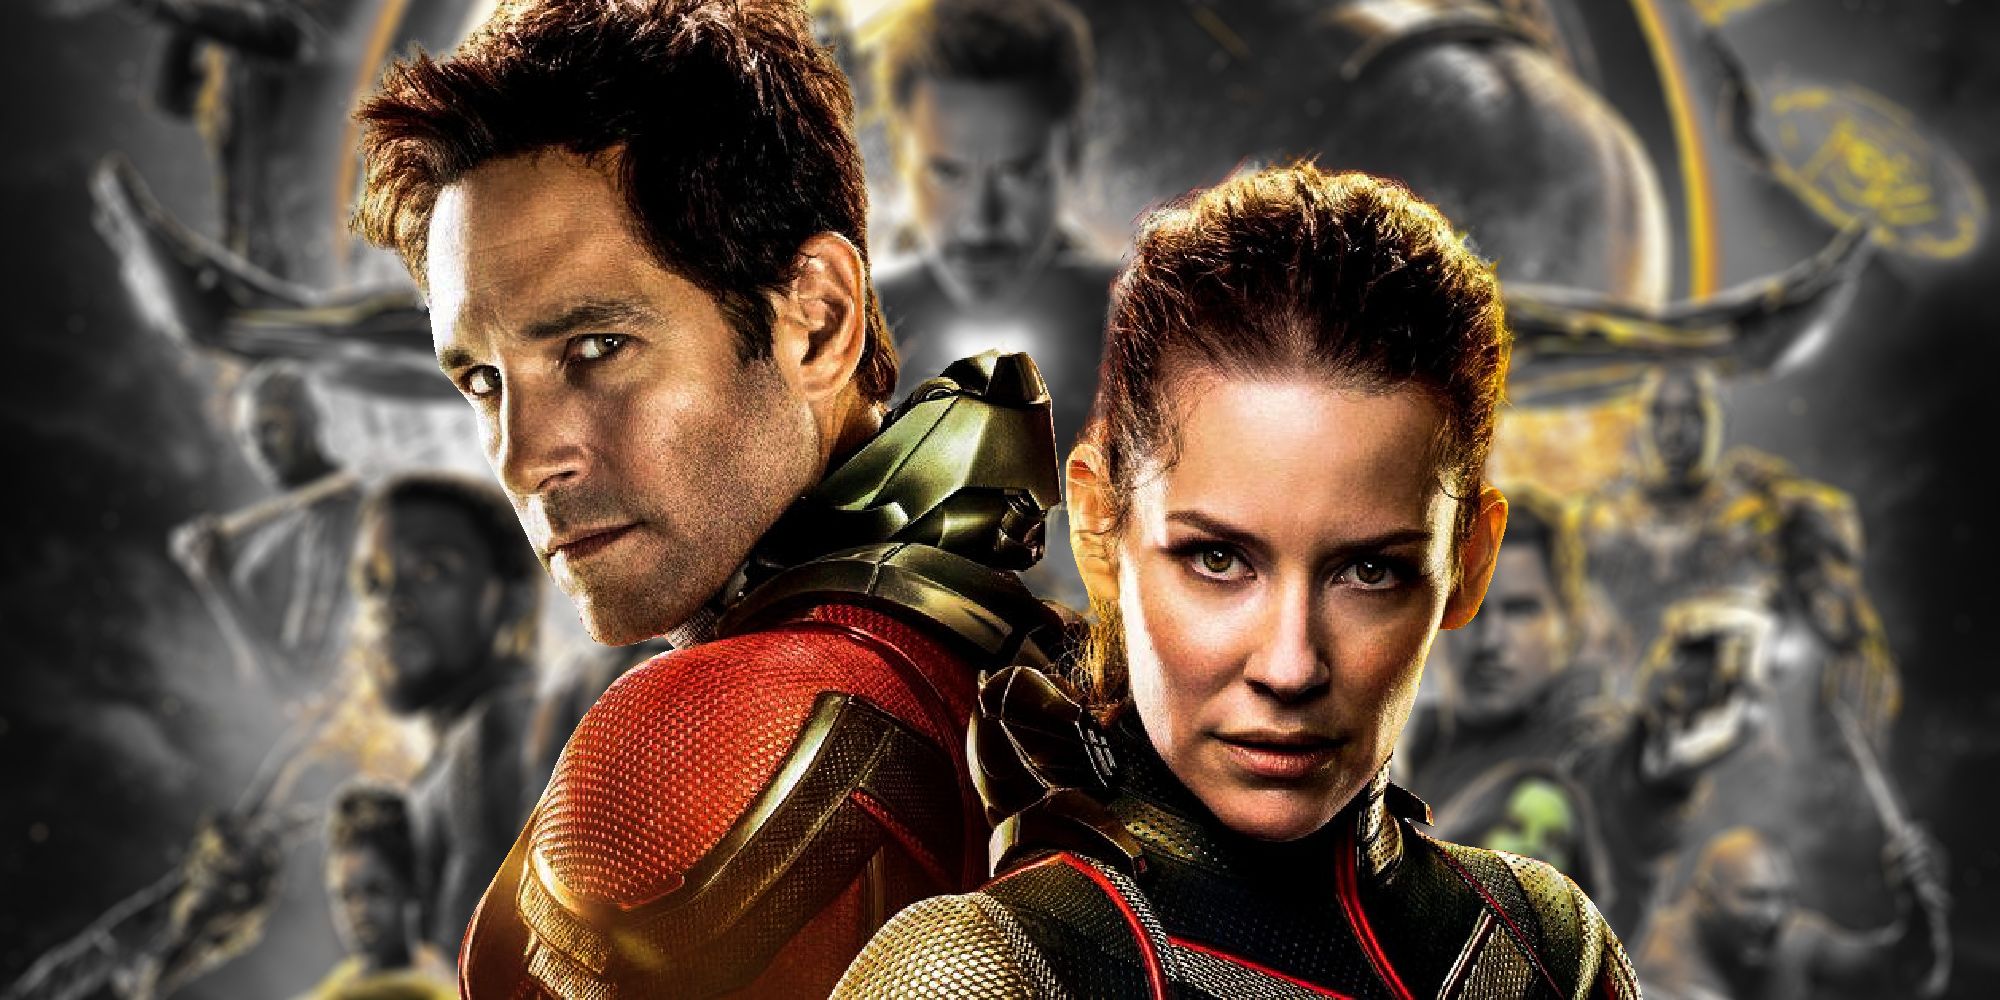 Marvel Confirms Where AntMan & the Wasp Fits Into The MCU Timeline